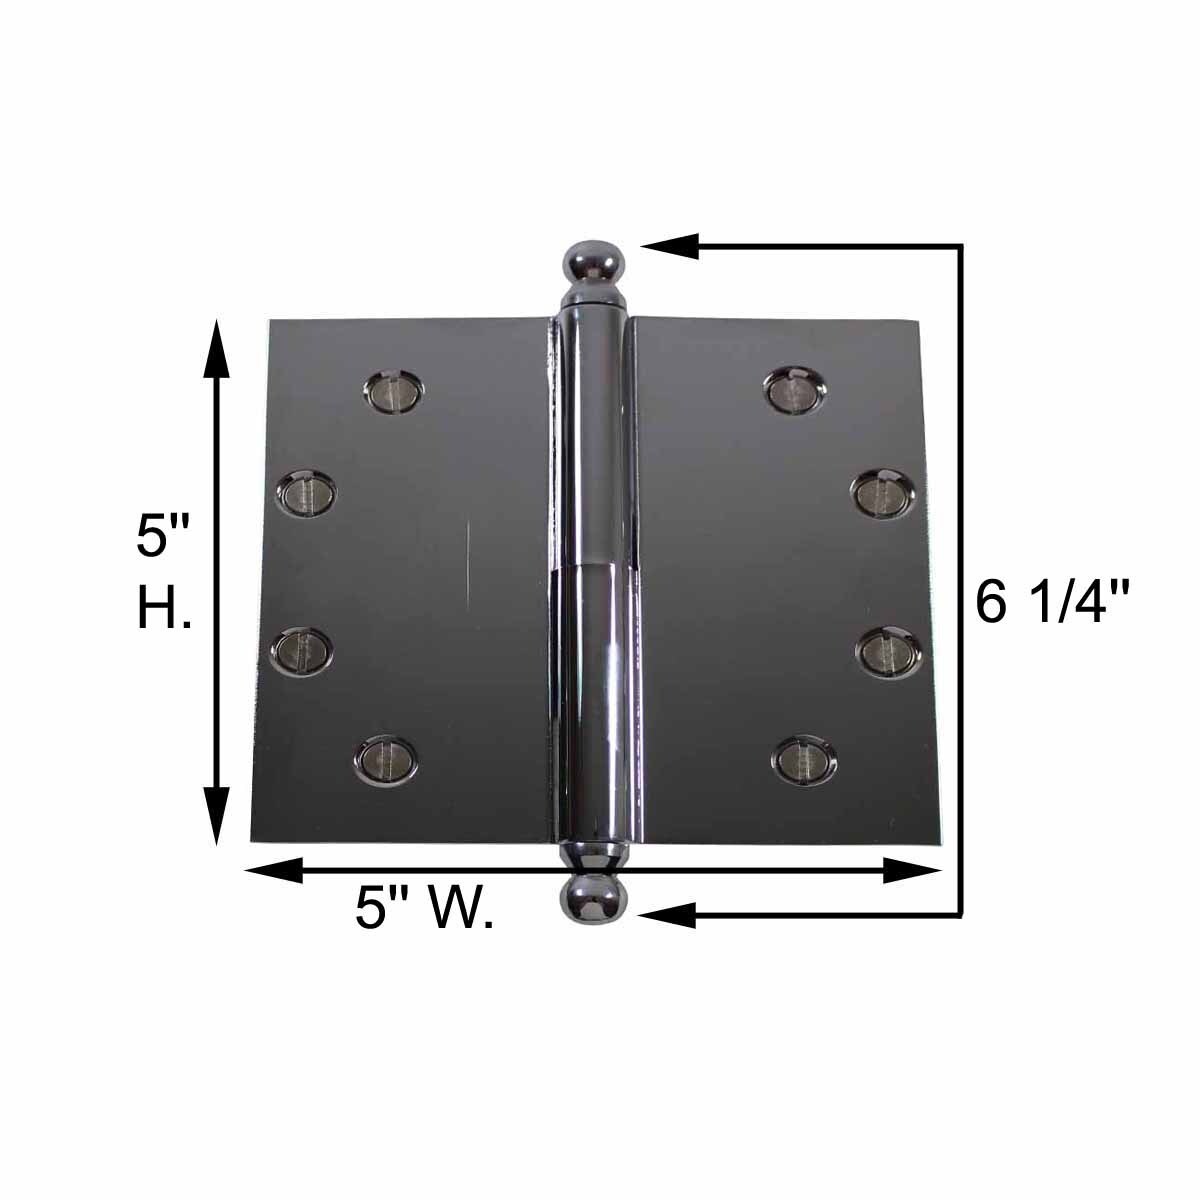 https://ak1.ostkcdn.com/images/products/is/images/direct/3a8a9cfc824ebc0431b7d4080c601a4dfebddc50/5-in.-Lift-Off-Right-Chrome-Brass-Door-Hinge-Ball-Tip-%7C-Renovator%27s-Supply.jpg